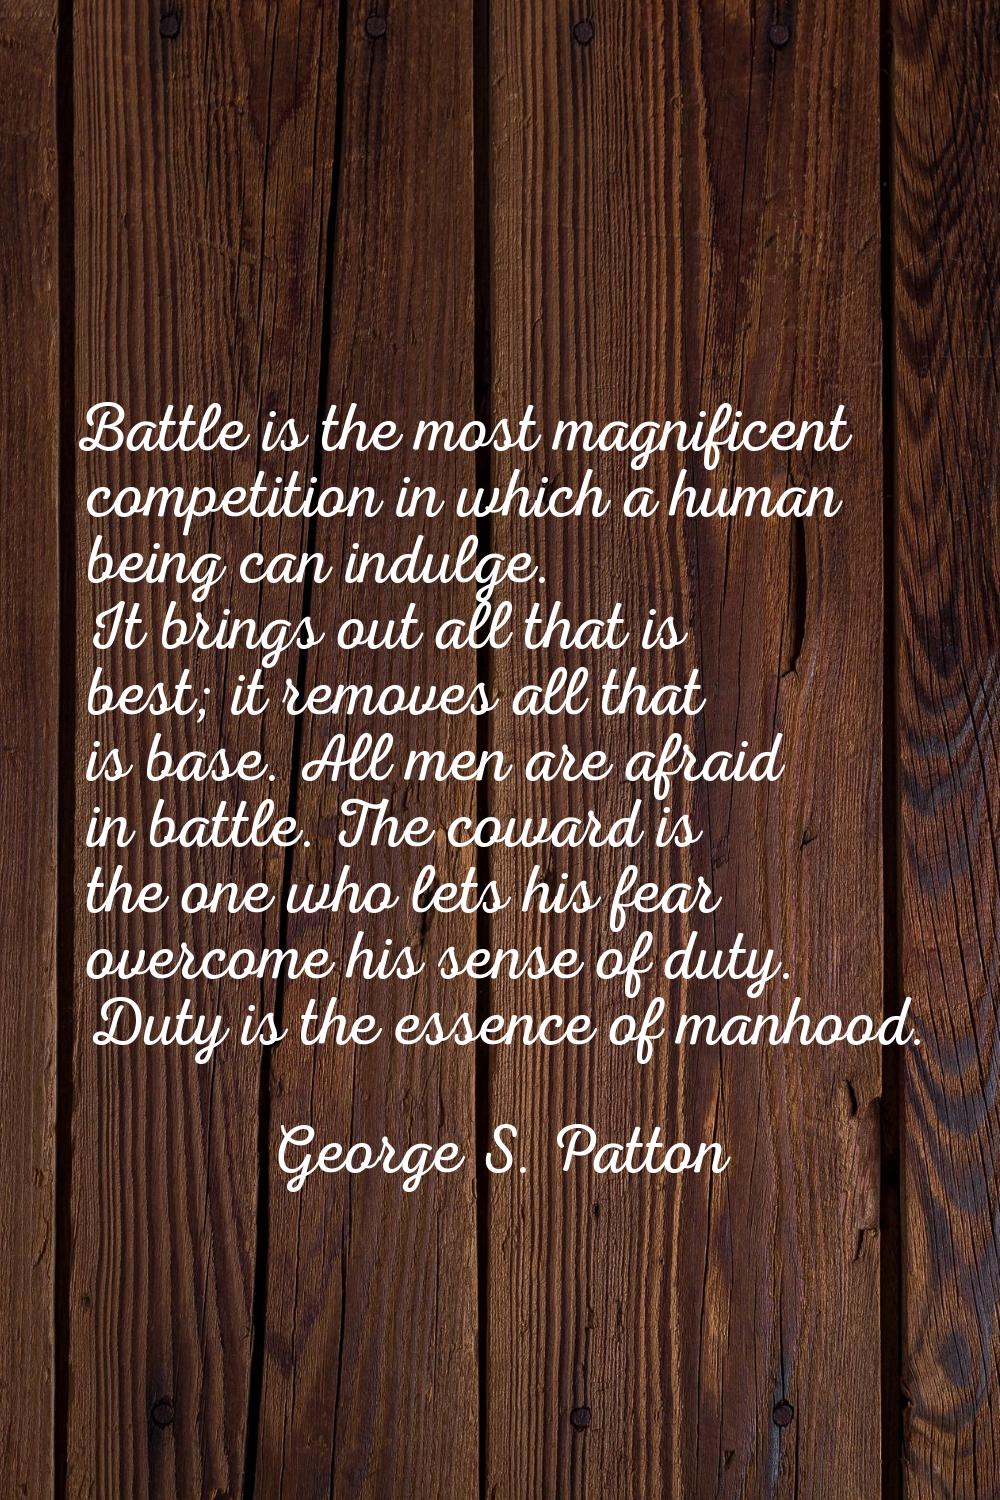 Battle is the most magnificent competition in which a human being can indulge. It brings out all th